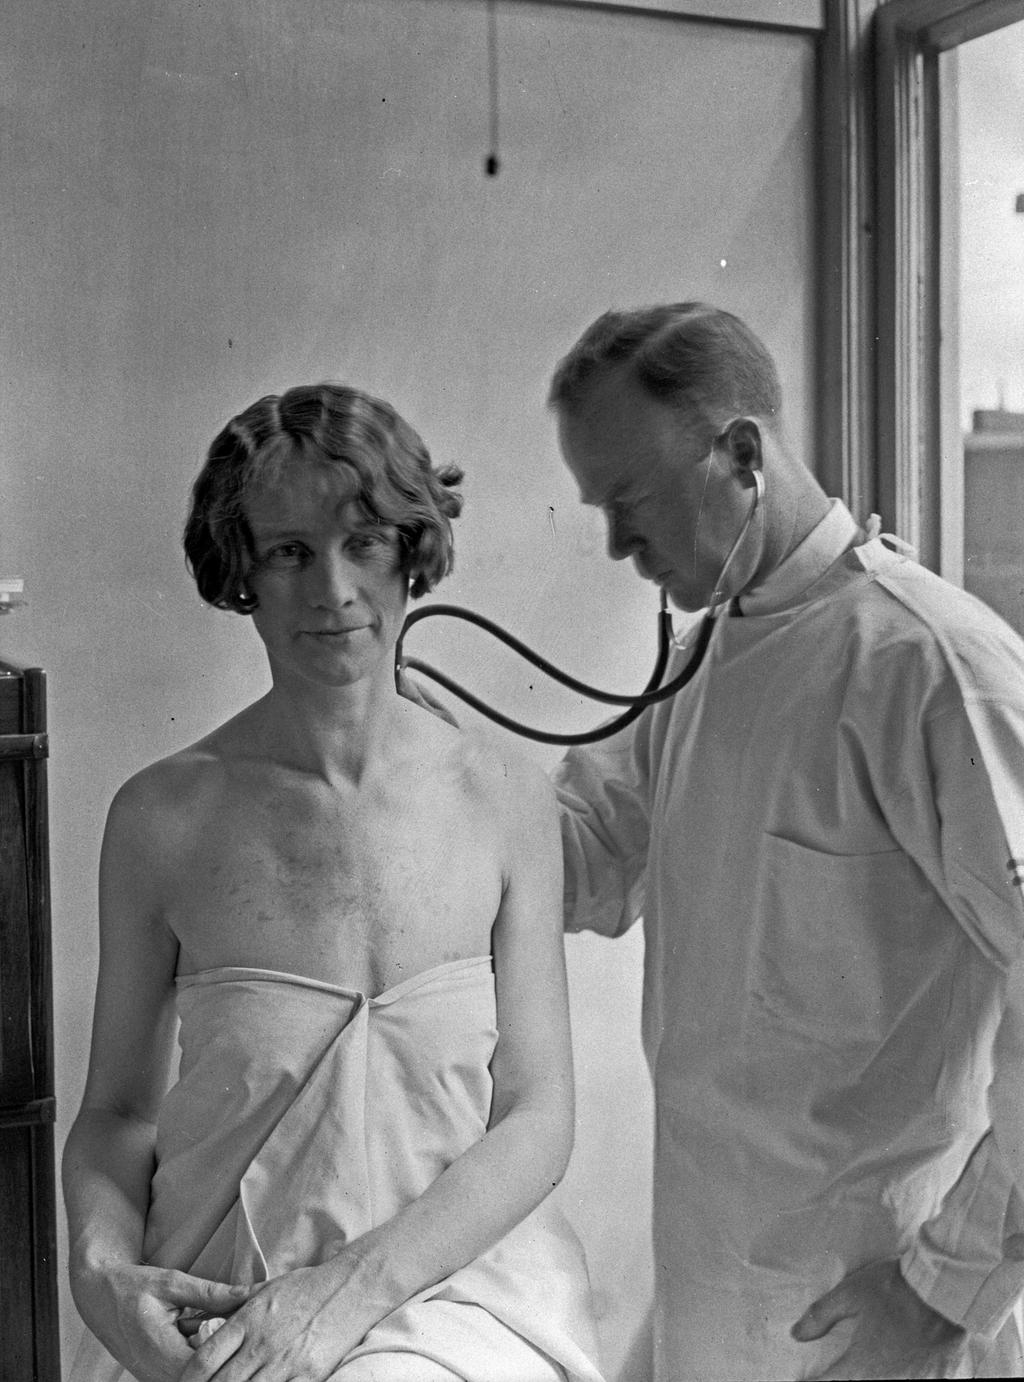 Grove 15 (https://farm4.staticflickr.com/3570/3786098177_8836fc1d53.jpg) This photograph is of a doctor and patient from the 1920s.